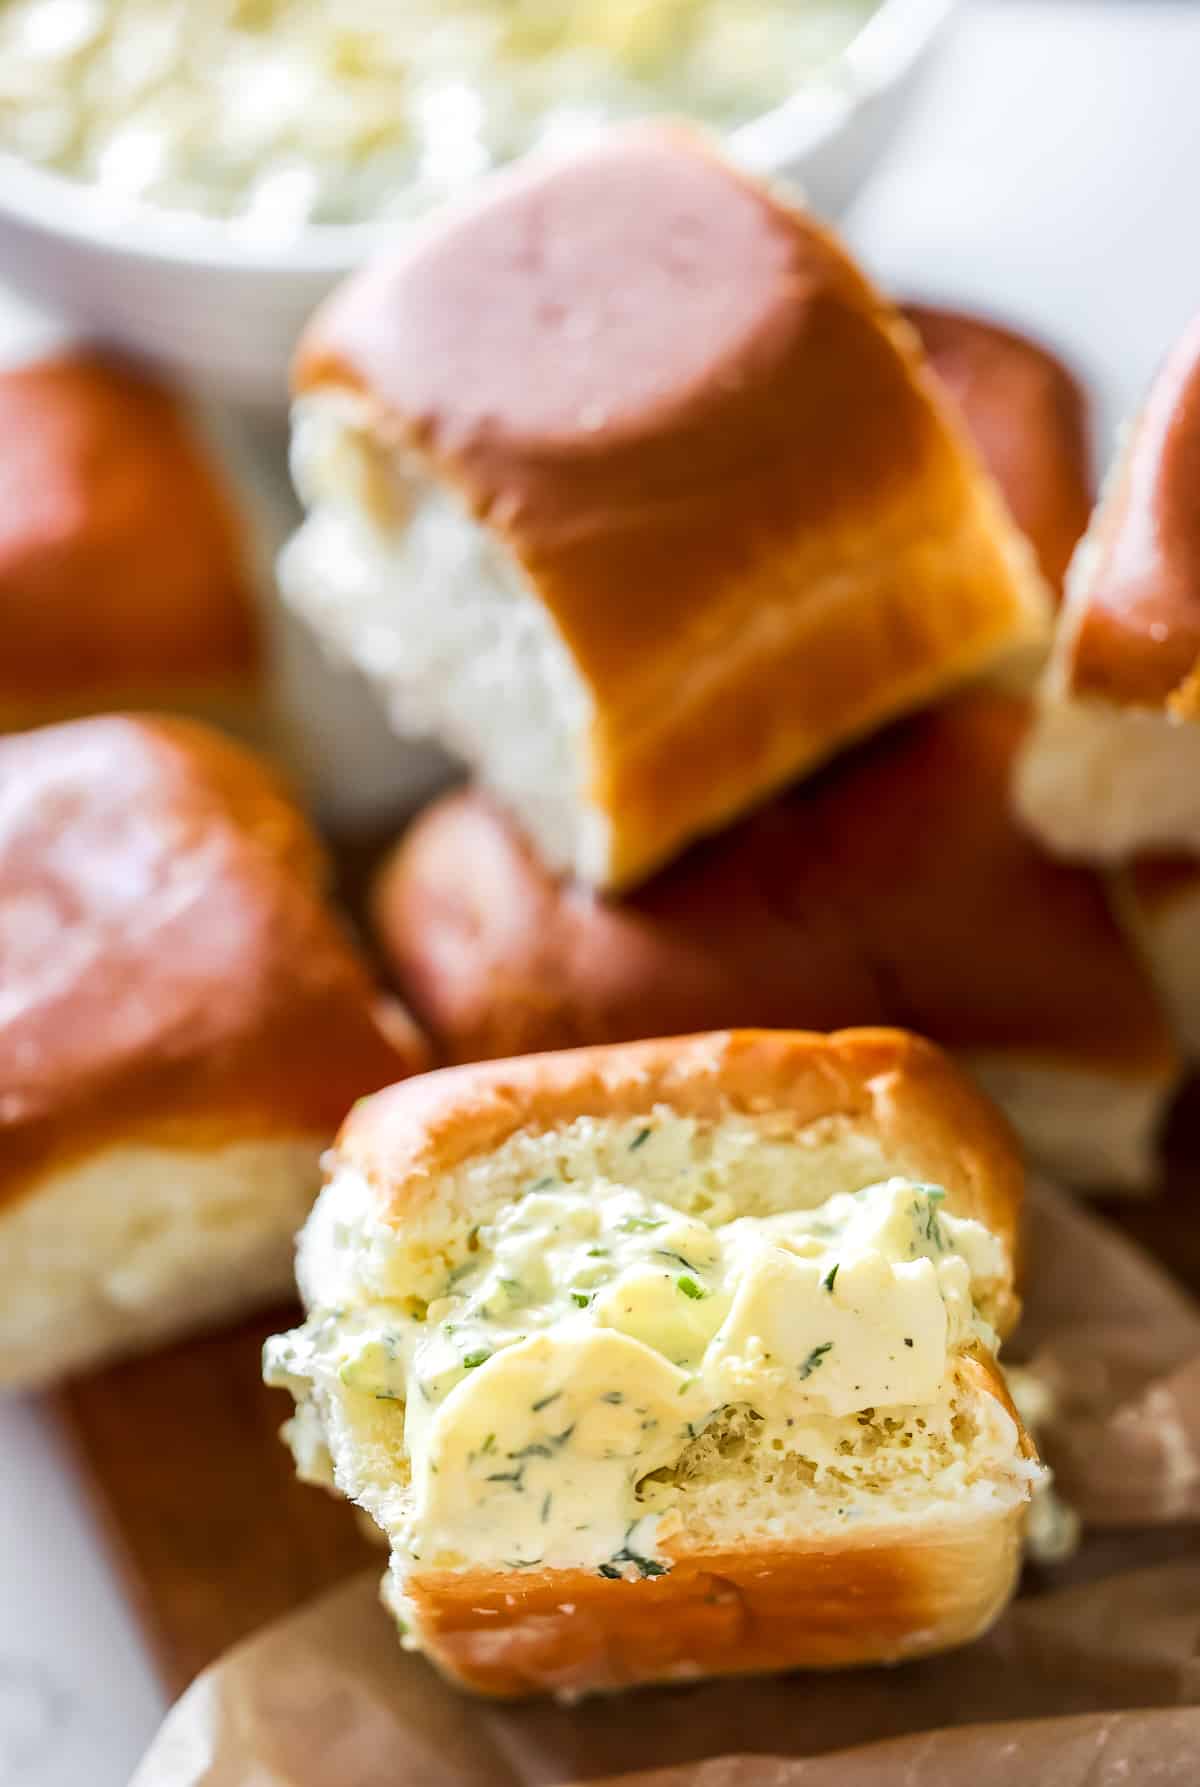 Egg salad served in a mini brioche bun, with a pile of buns.